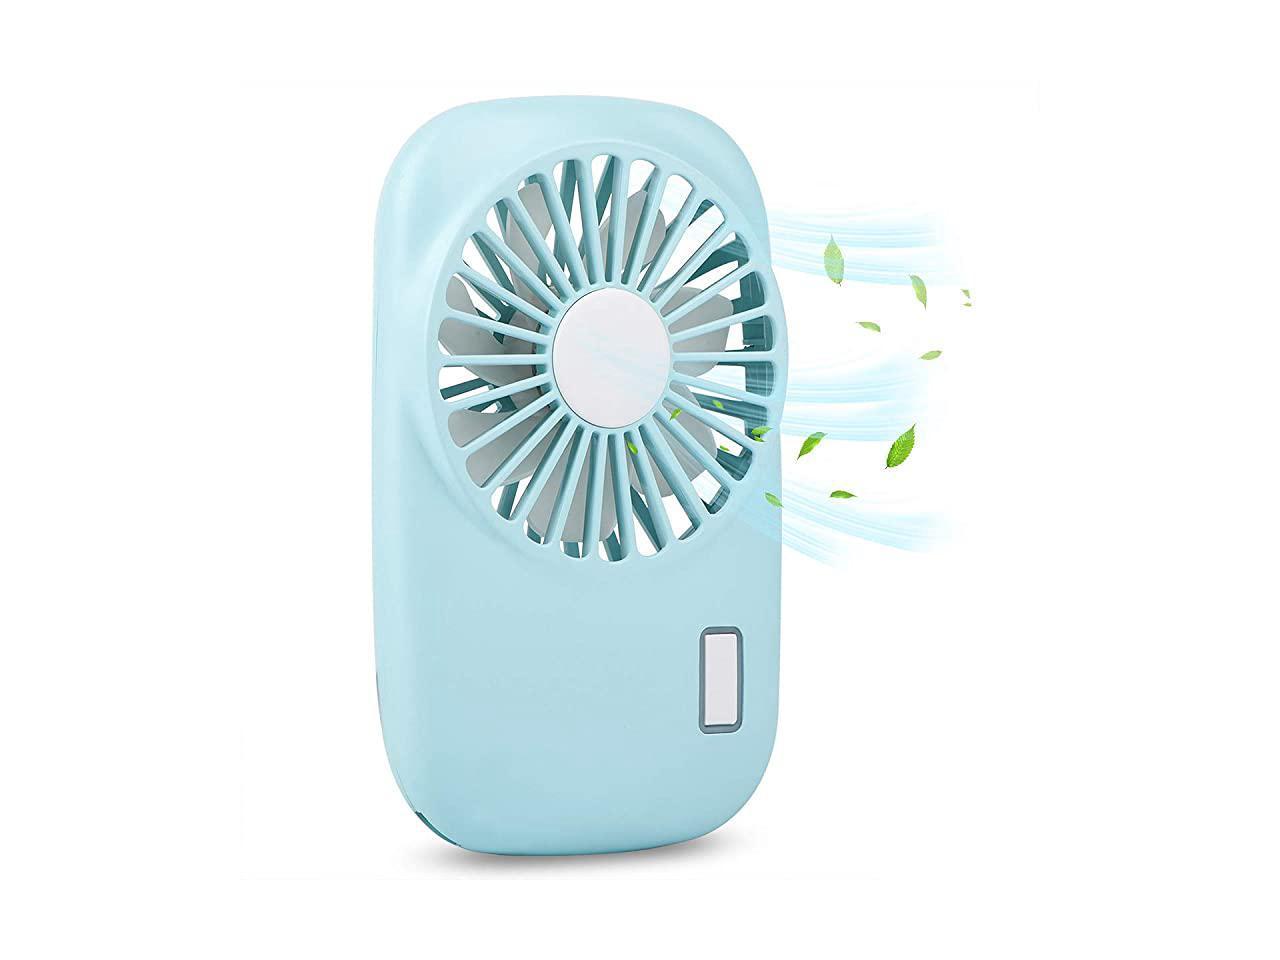 Hand Held USB Fan Portable Mini Hand Held USB Fan Creative Camera Shape Rechargeable Summer Air Conditioner Cooling Fan for Outdoor Travel